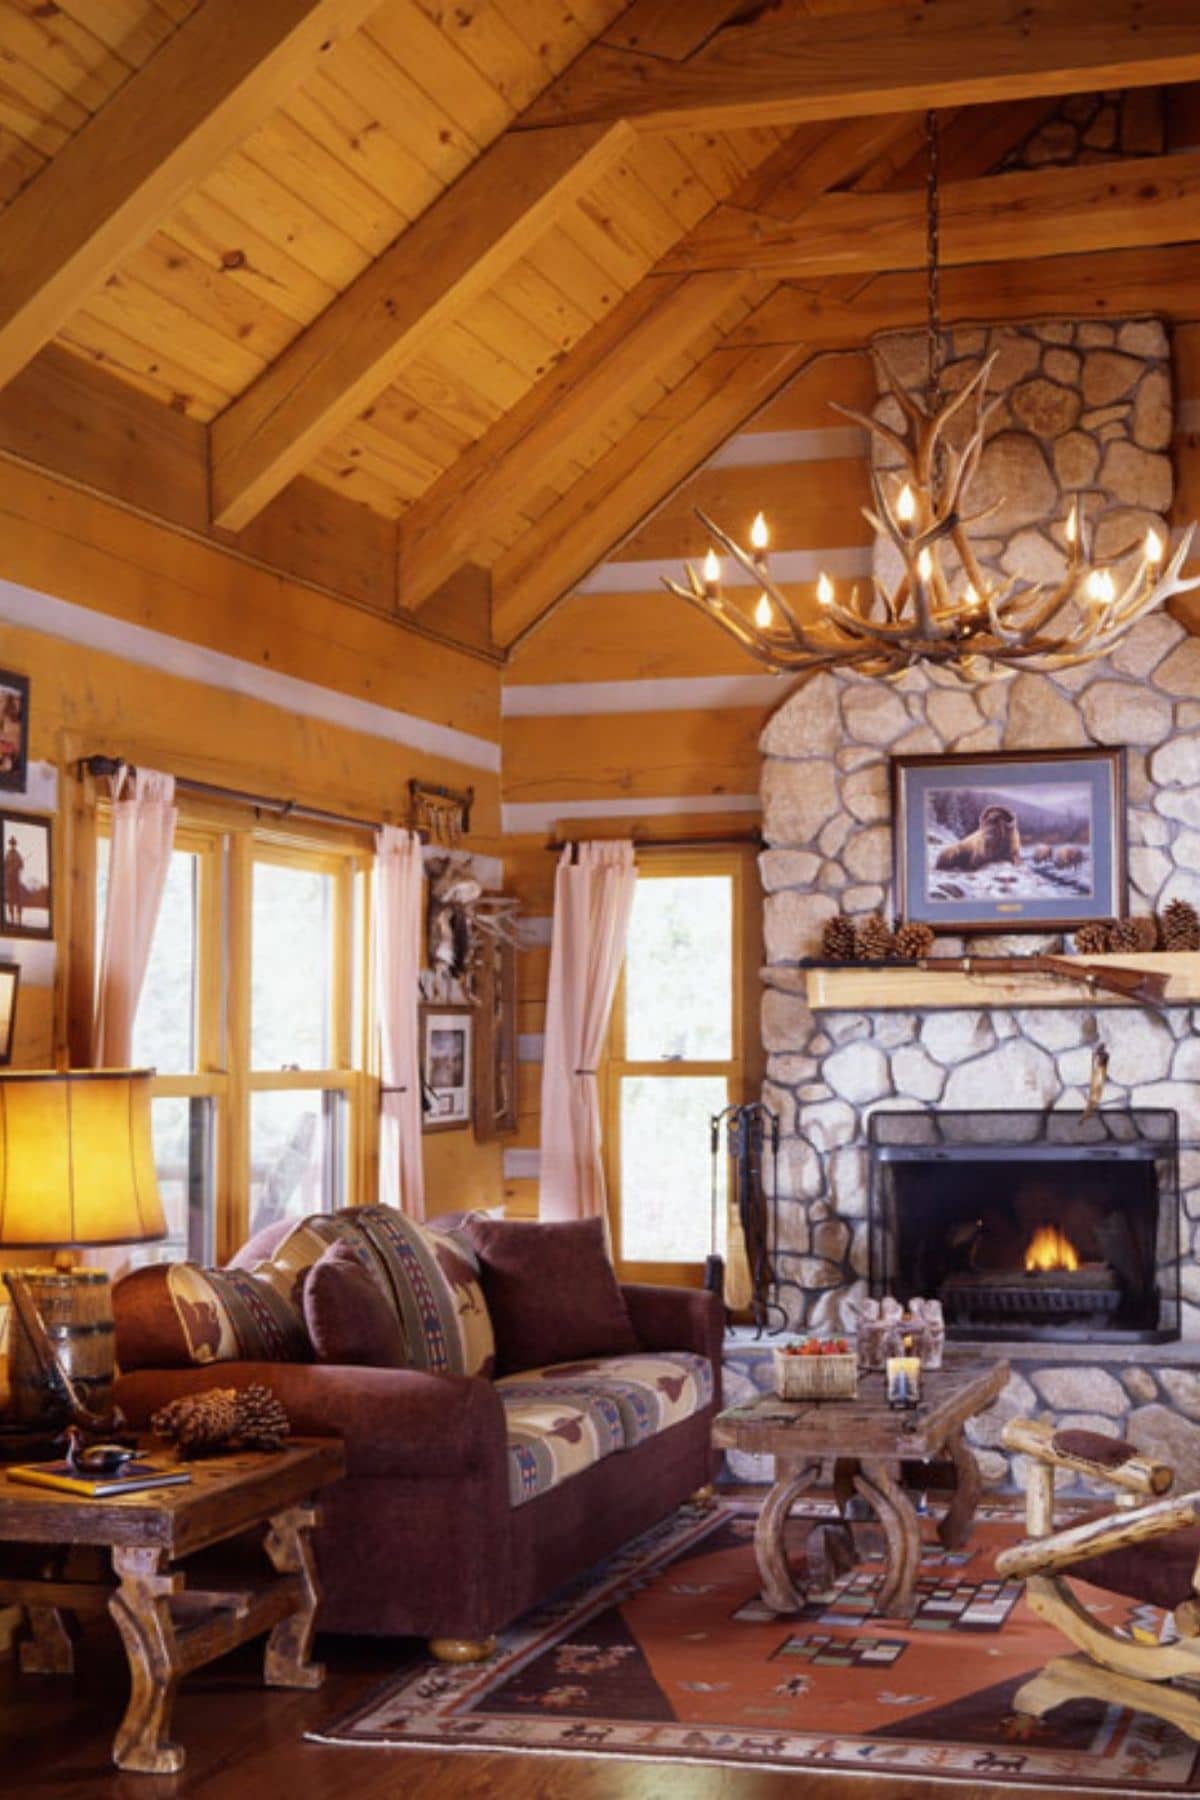 stone fireplace with wooden mantle inside log cabin with antler chandelier in middle of room